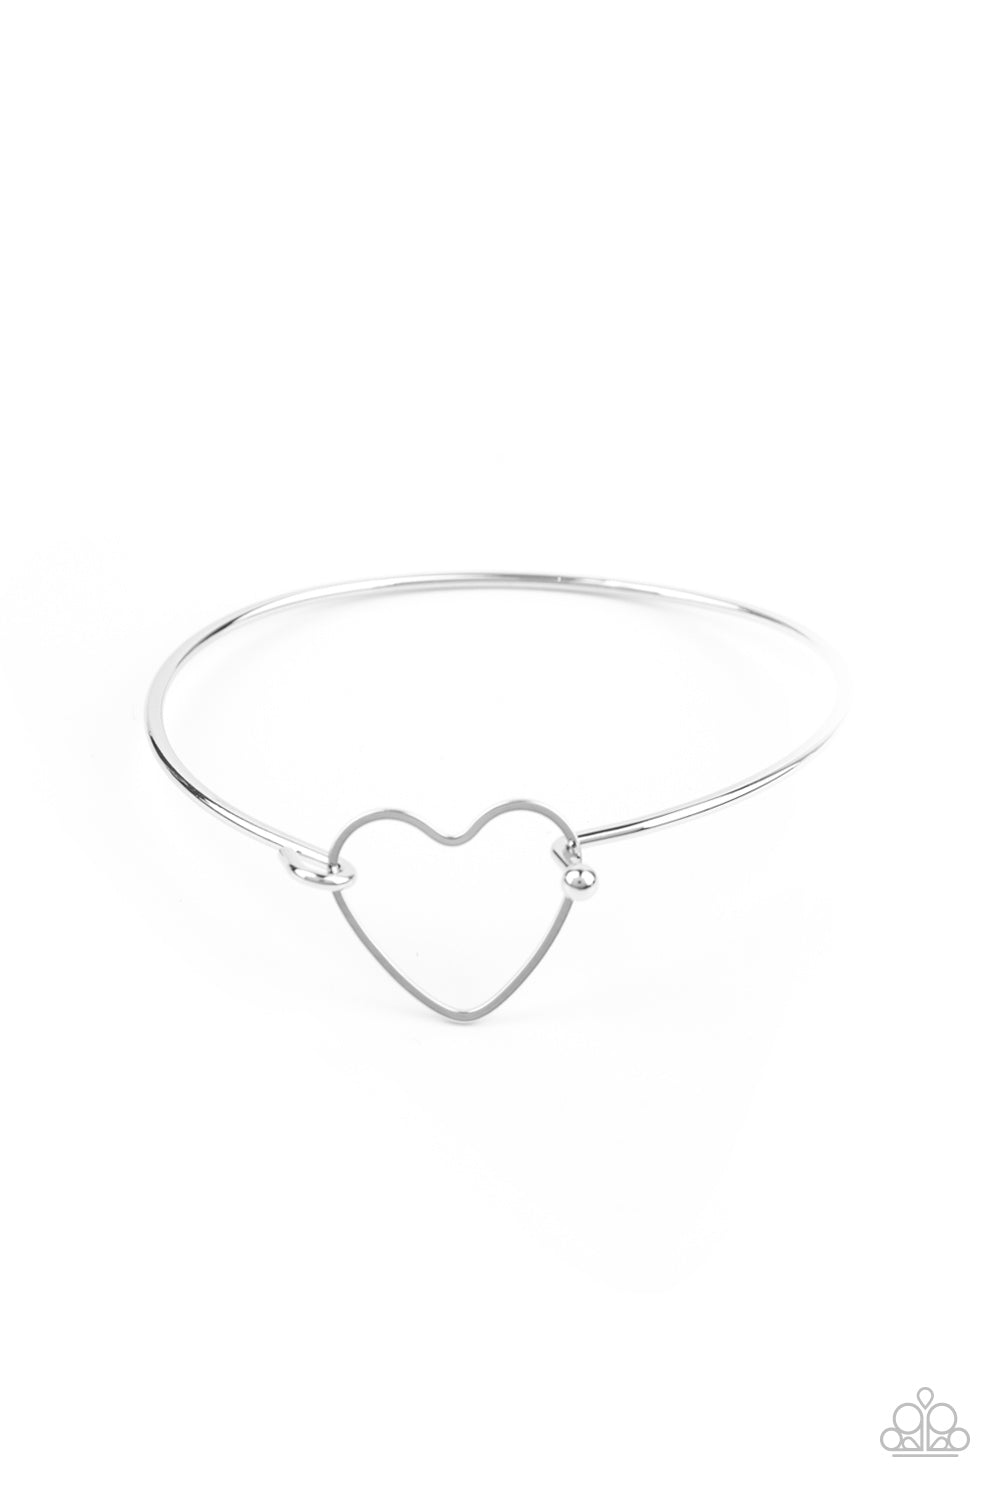 Paparazzi Make Yourself HEART - Silver Bracelet - A Finishing Touch 